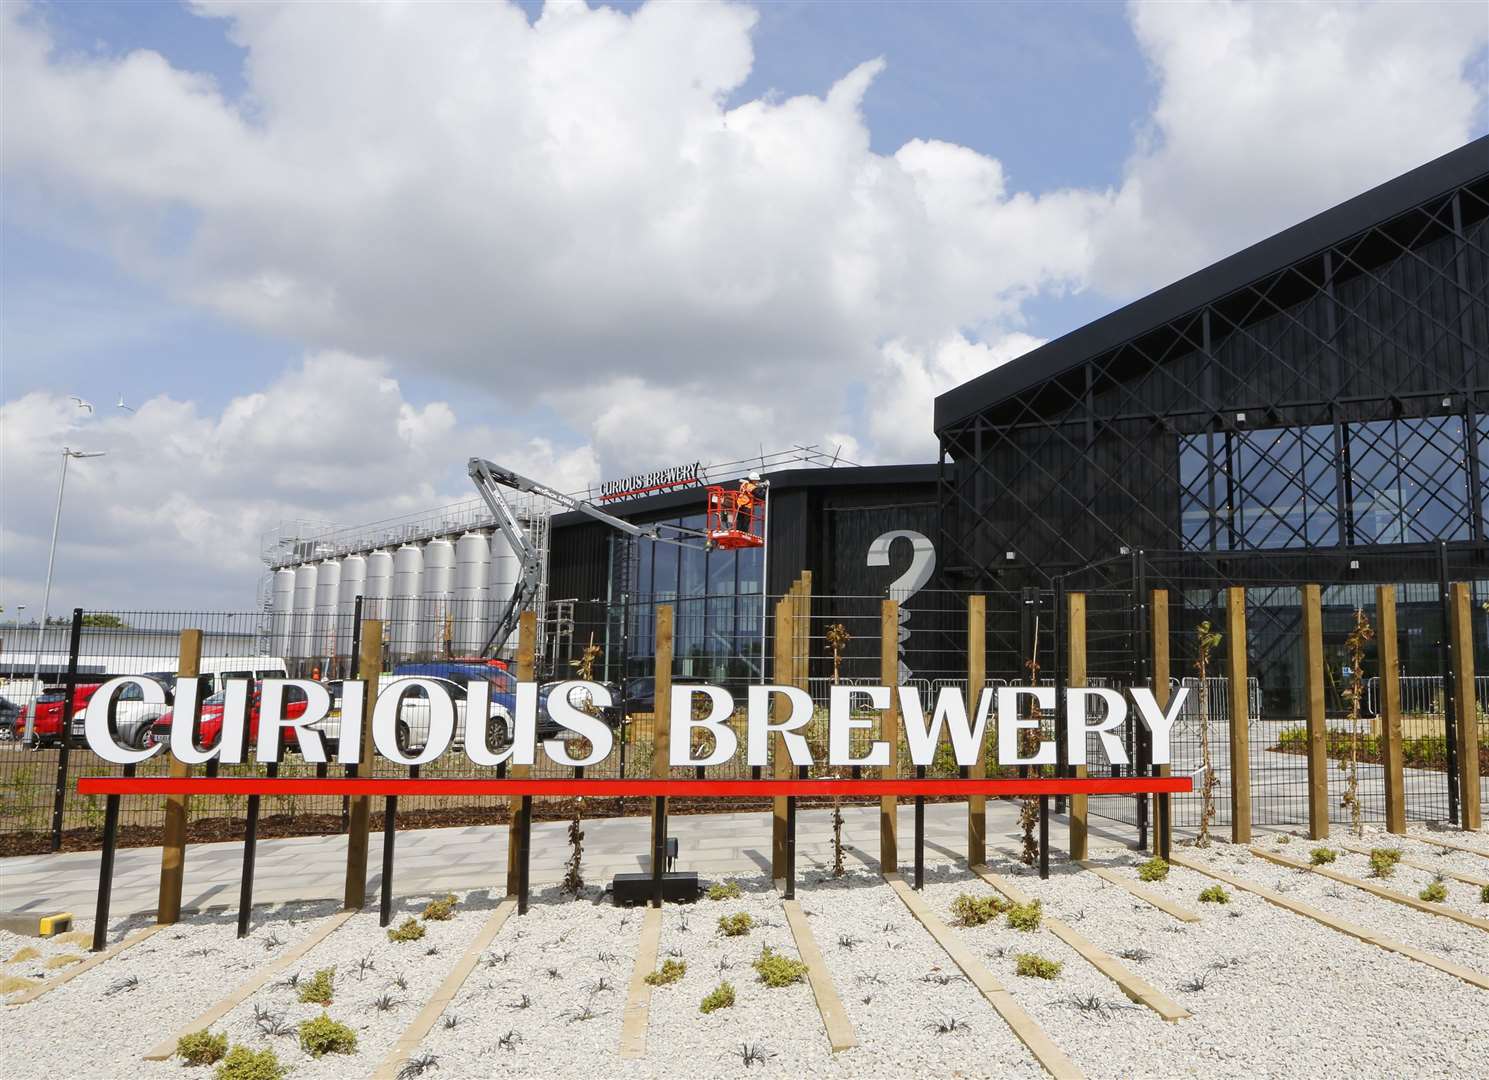 The Curious Brewery in Ashford opens on Friday